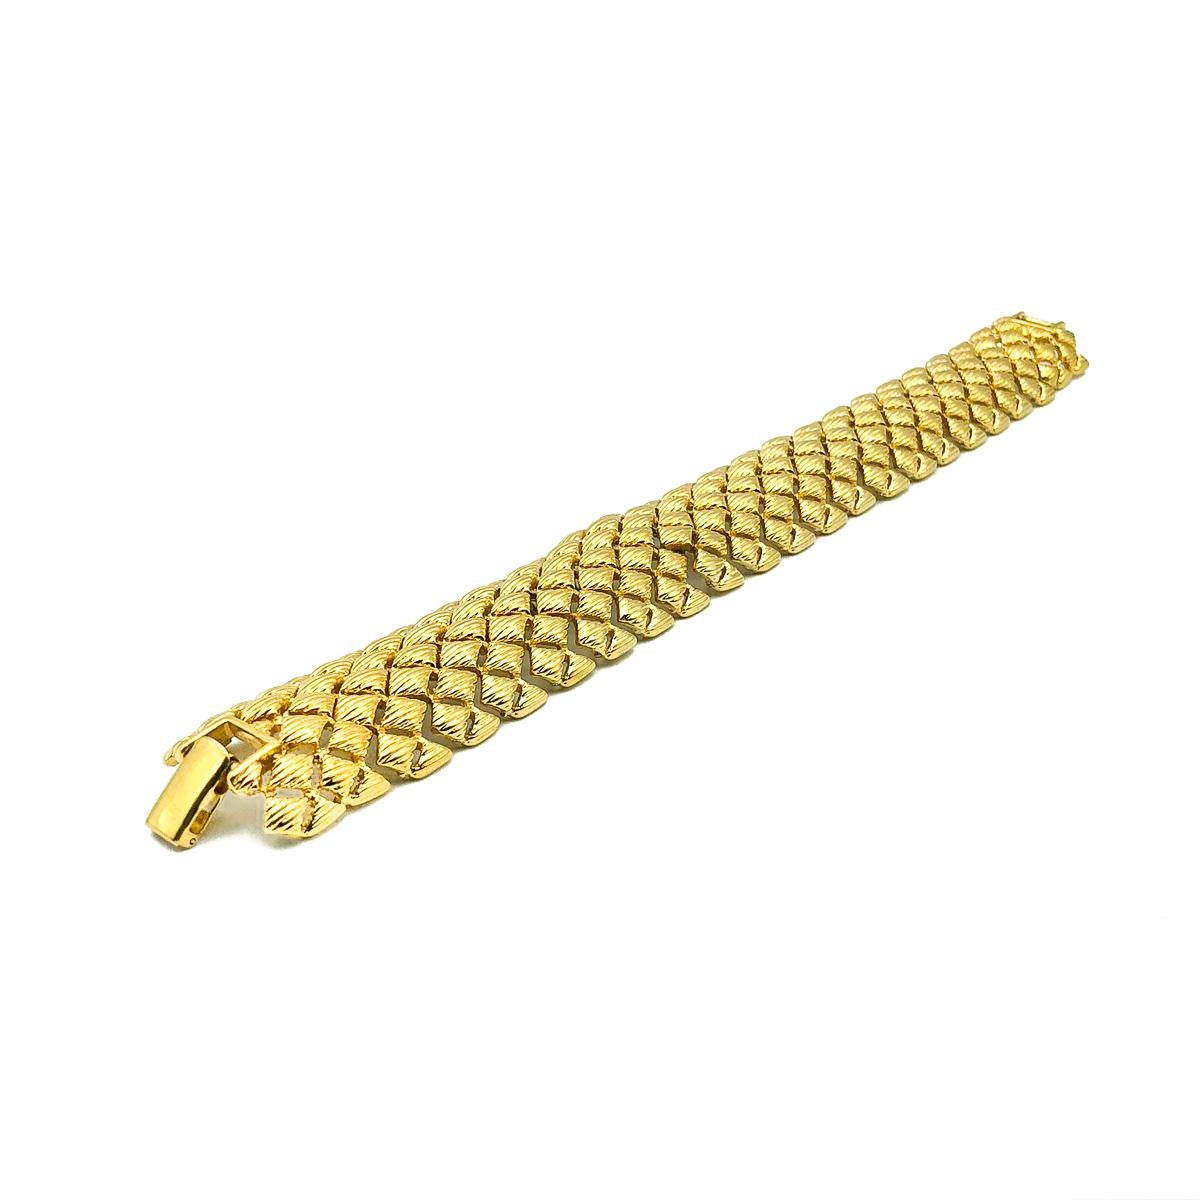 A striking Vintage Monet Weave Bracelet. Crafted in gold plated metal. In very good vintage condition. Signed. Approx. 20cms. This one will prove itself as a timeless style classic. 

Established in 2016, this is a British brand that is already